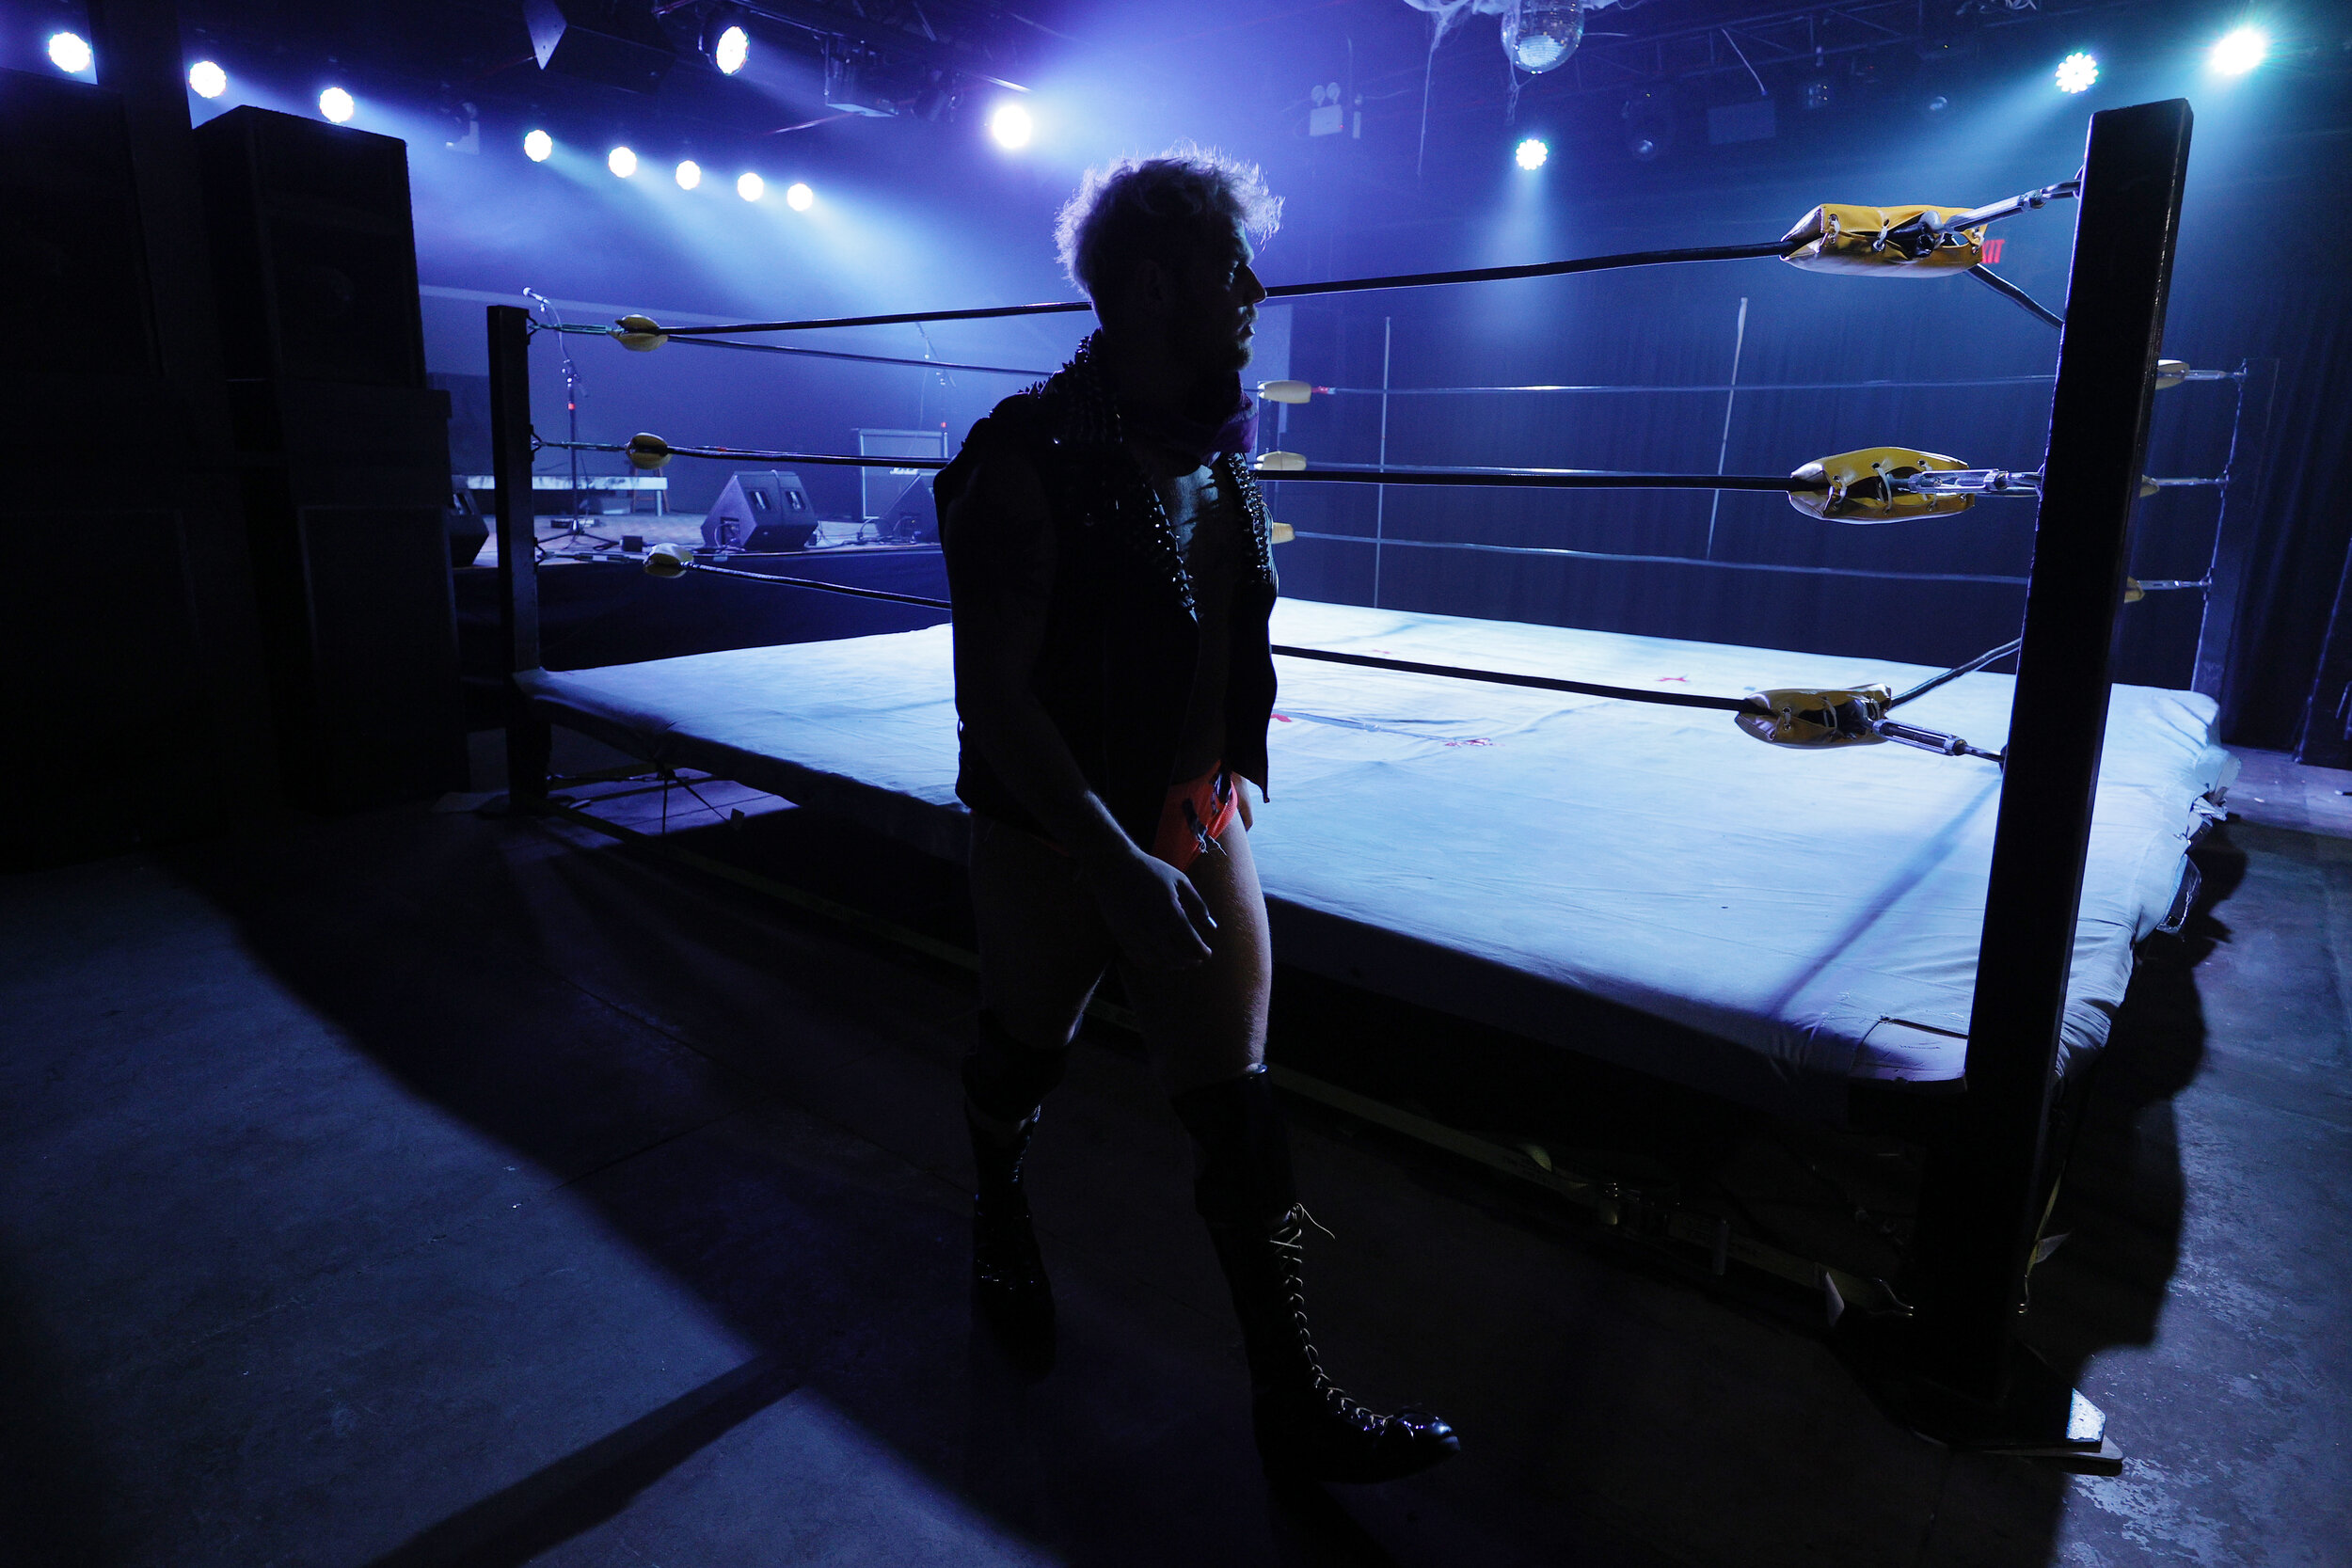  MV Young takes a look at the ring before his match on February 27, 2021, at an undisclosed location in Brooklyn, New York. 